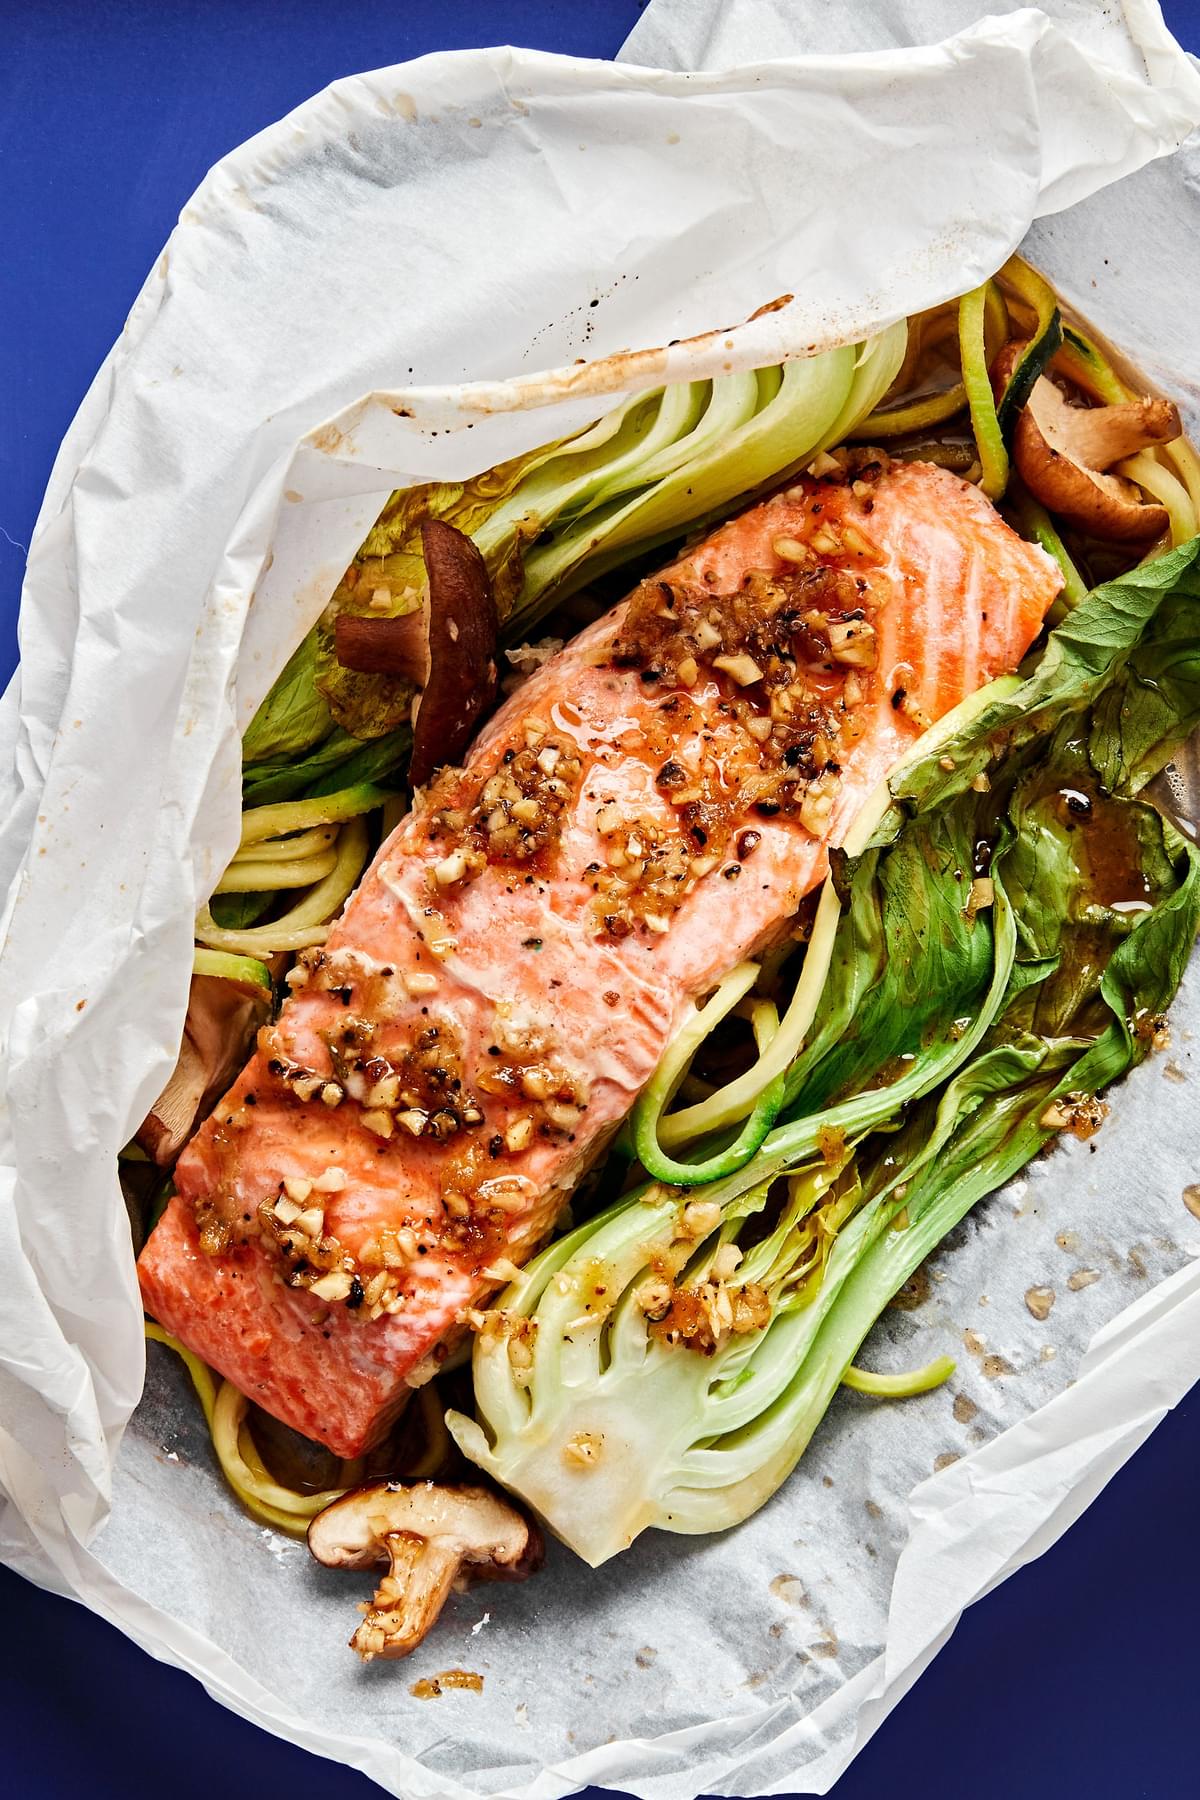 30 Minute garlic ginger salmon dinner with zucchini noodles, bok choy and shitake mushrooms in parchment paper